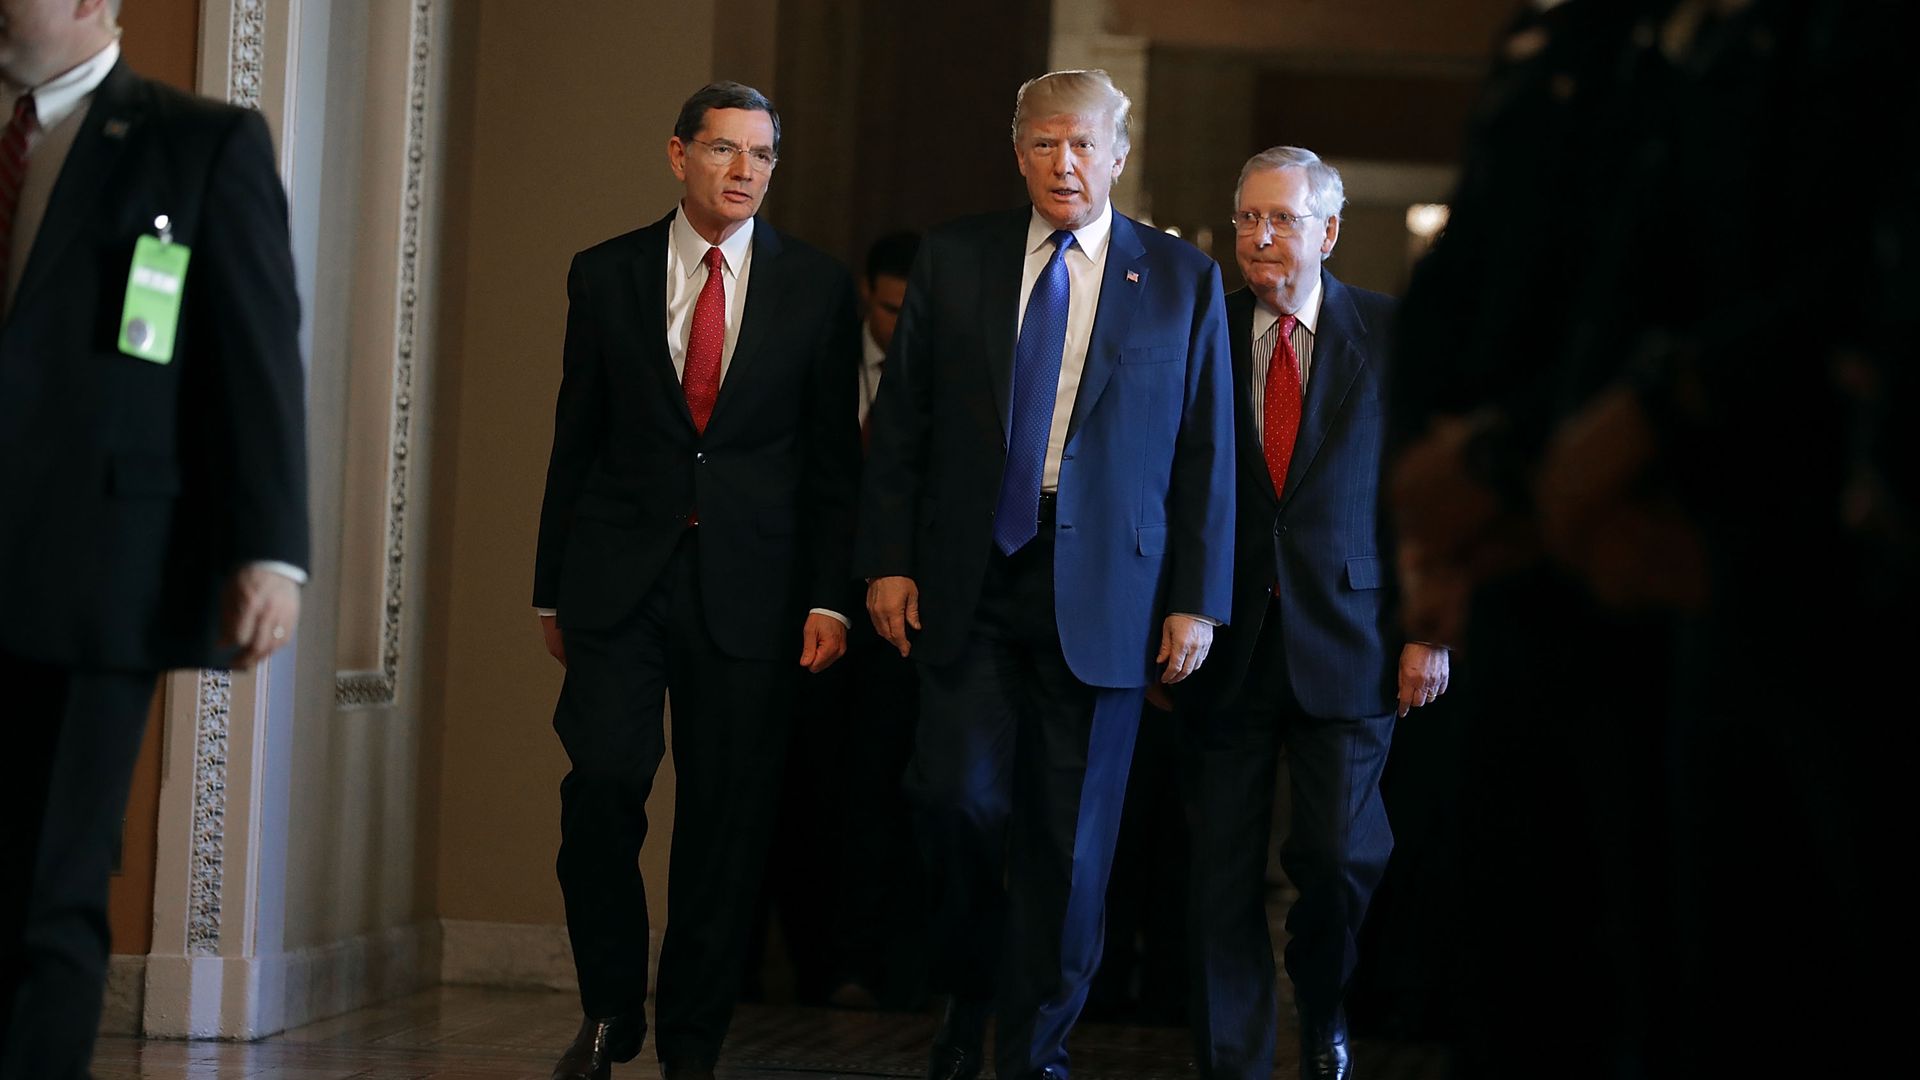 President Trump with Sens. John Barrasso and Mitch McConnell